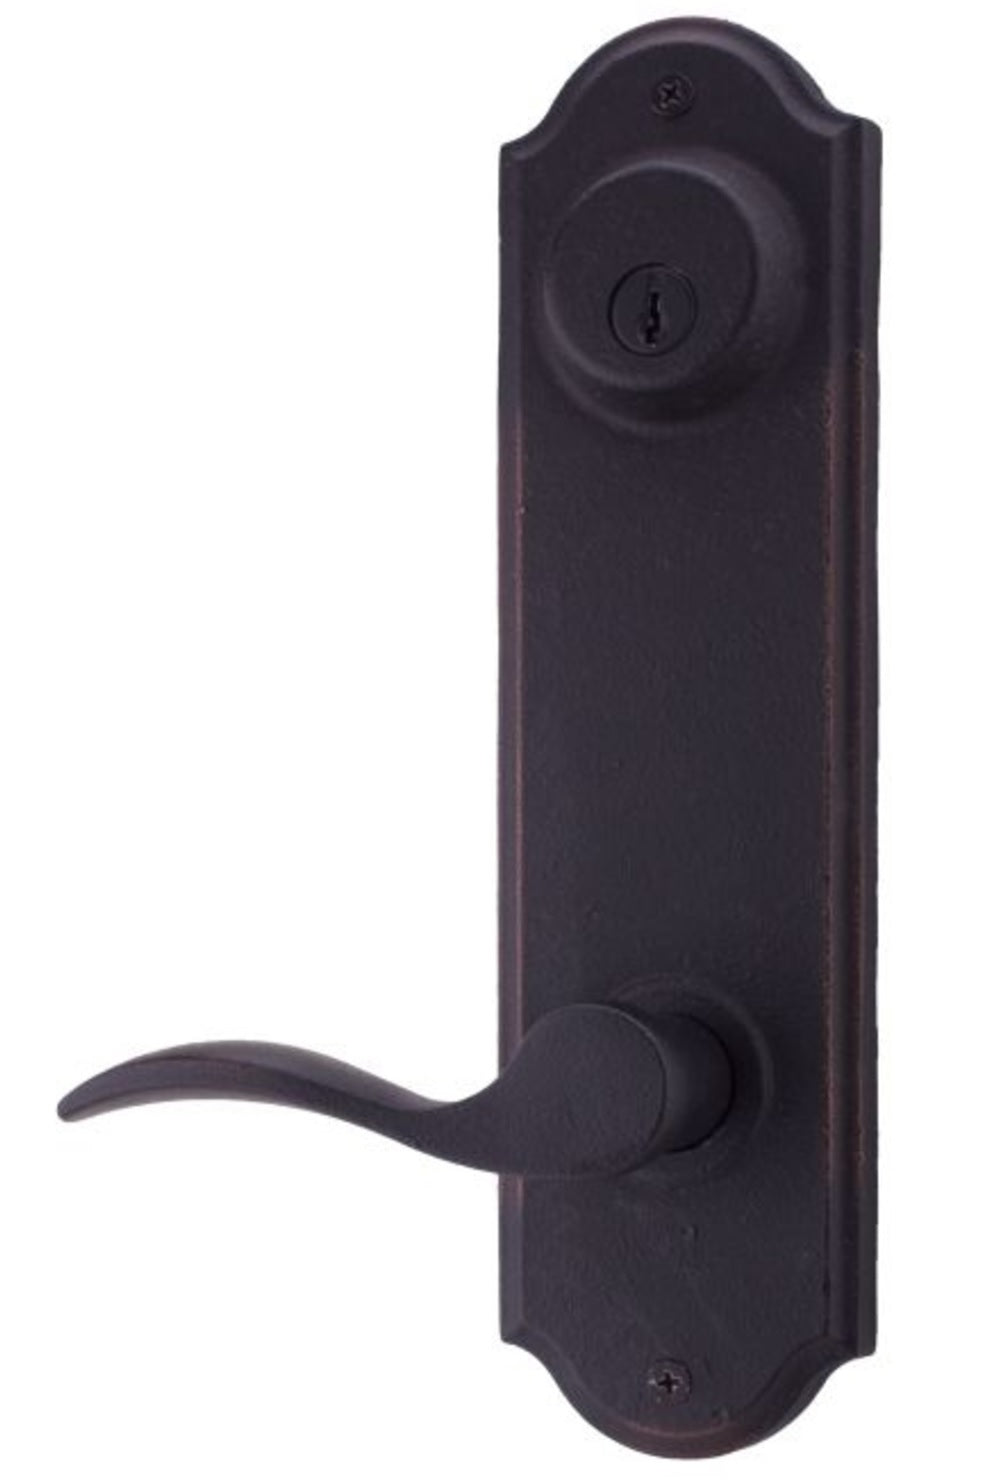 Weslock R7602--H1SL20 Right Hand Carlow Double Cylinder Handleset Trim, Oil Rubbed Bronze